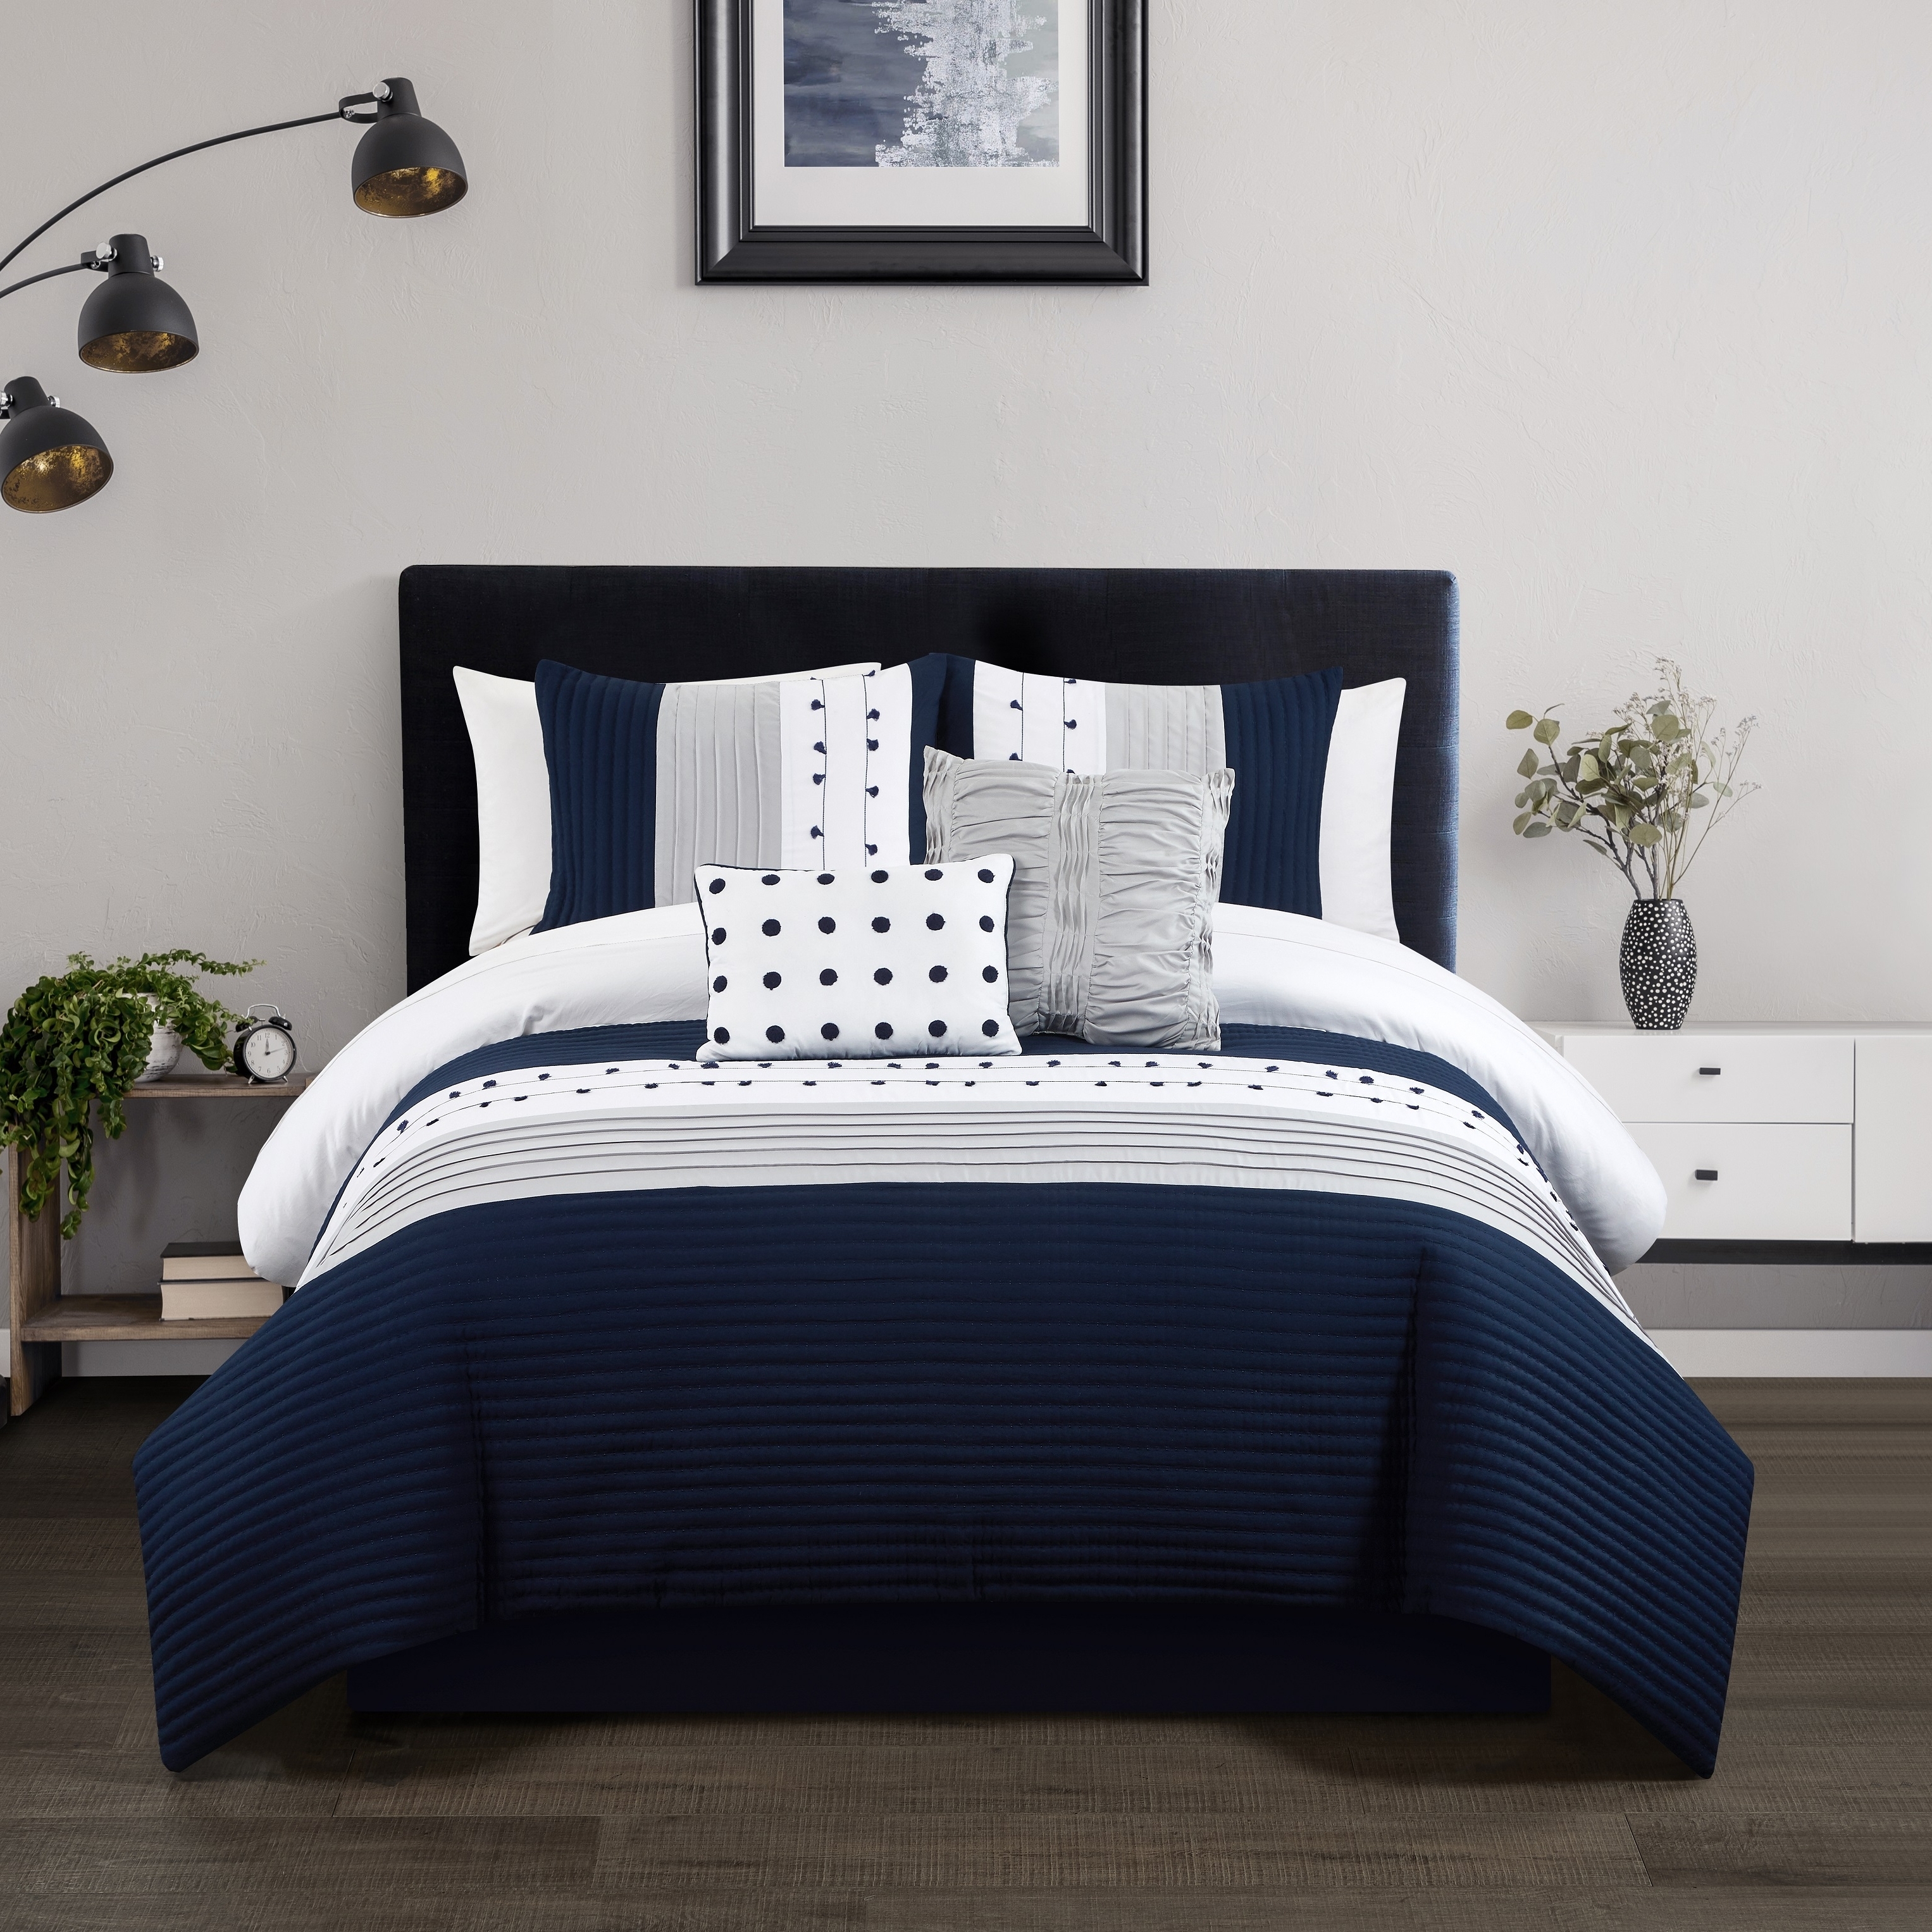 Lainy 5 Piece Comforter Set Color Block Pleated Ribbed Embroidered Bedding - Navy, Queen